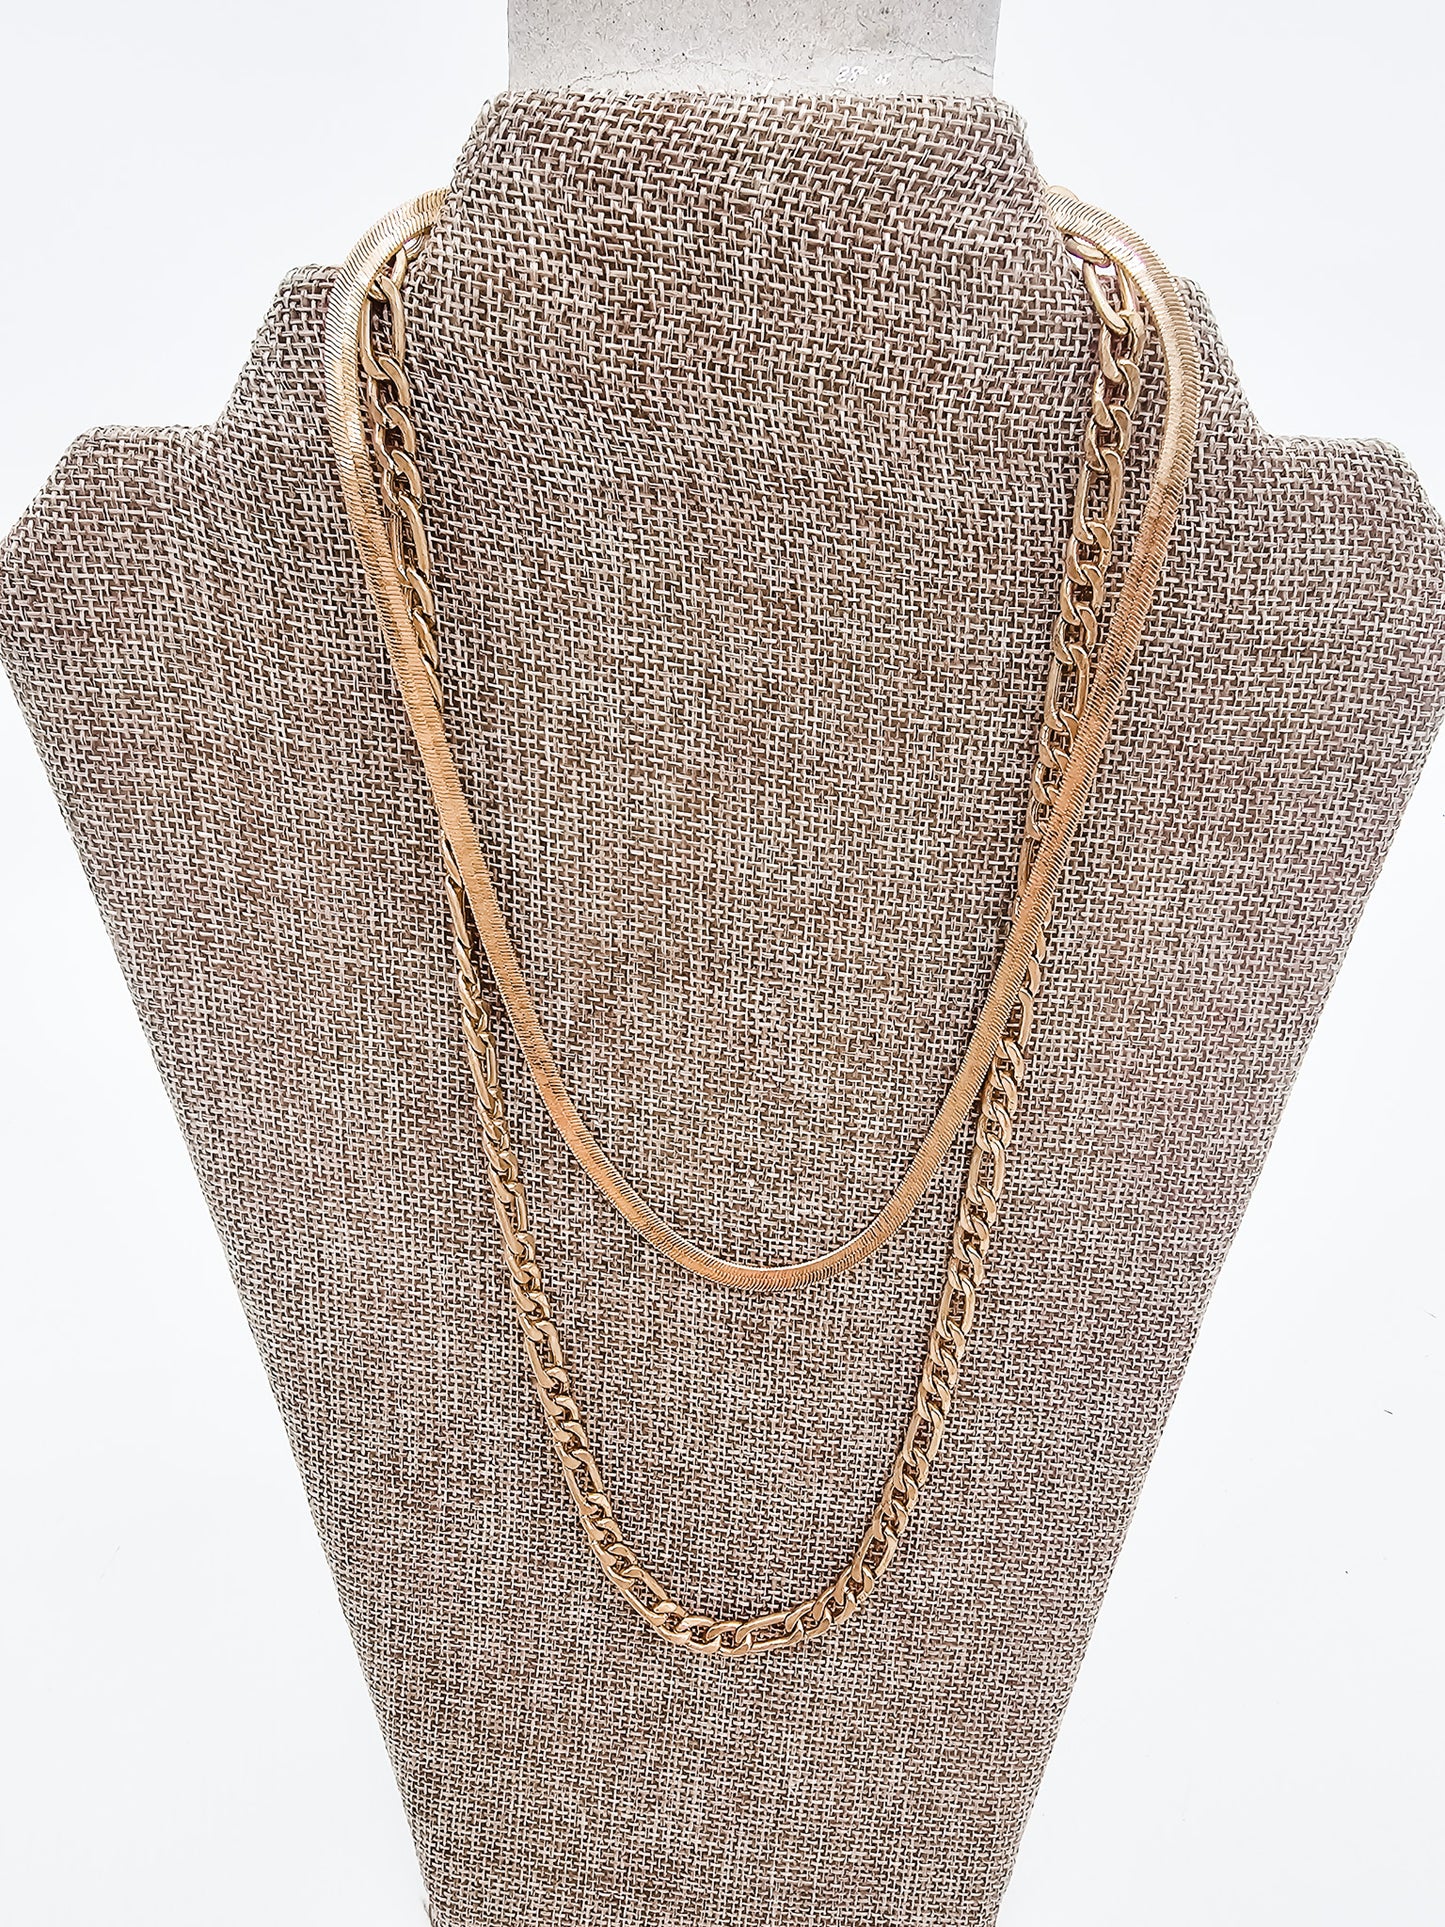 Gold & Silver Short Chain Necklaces - Variety